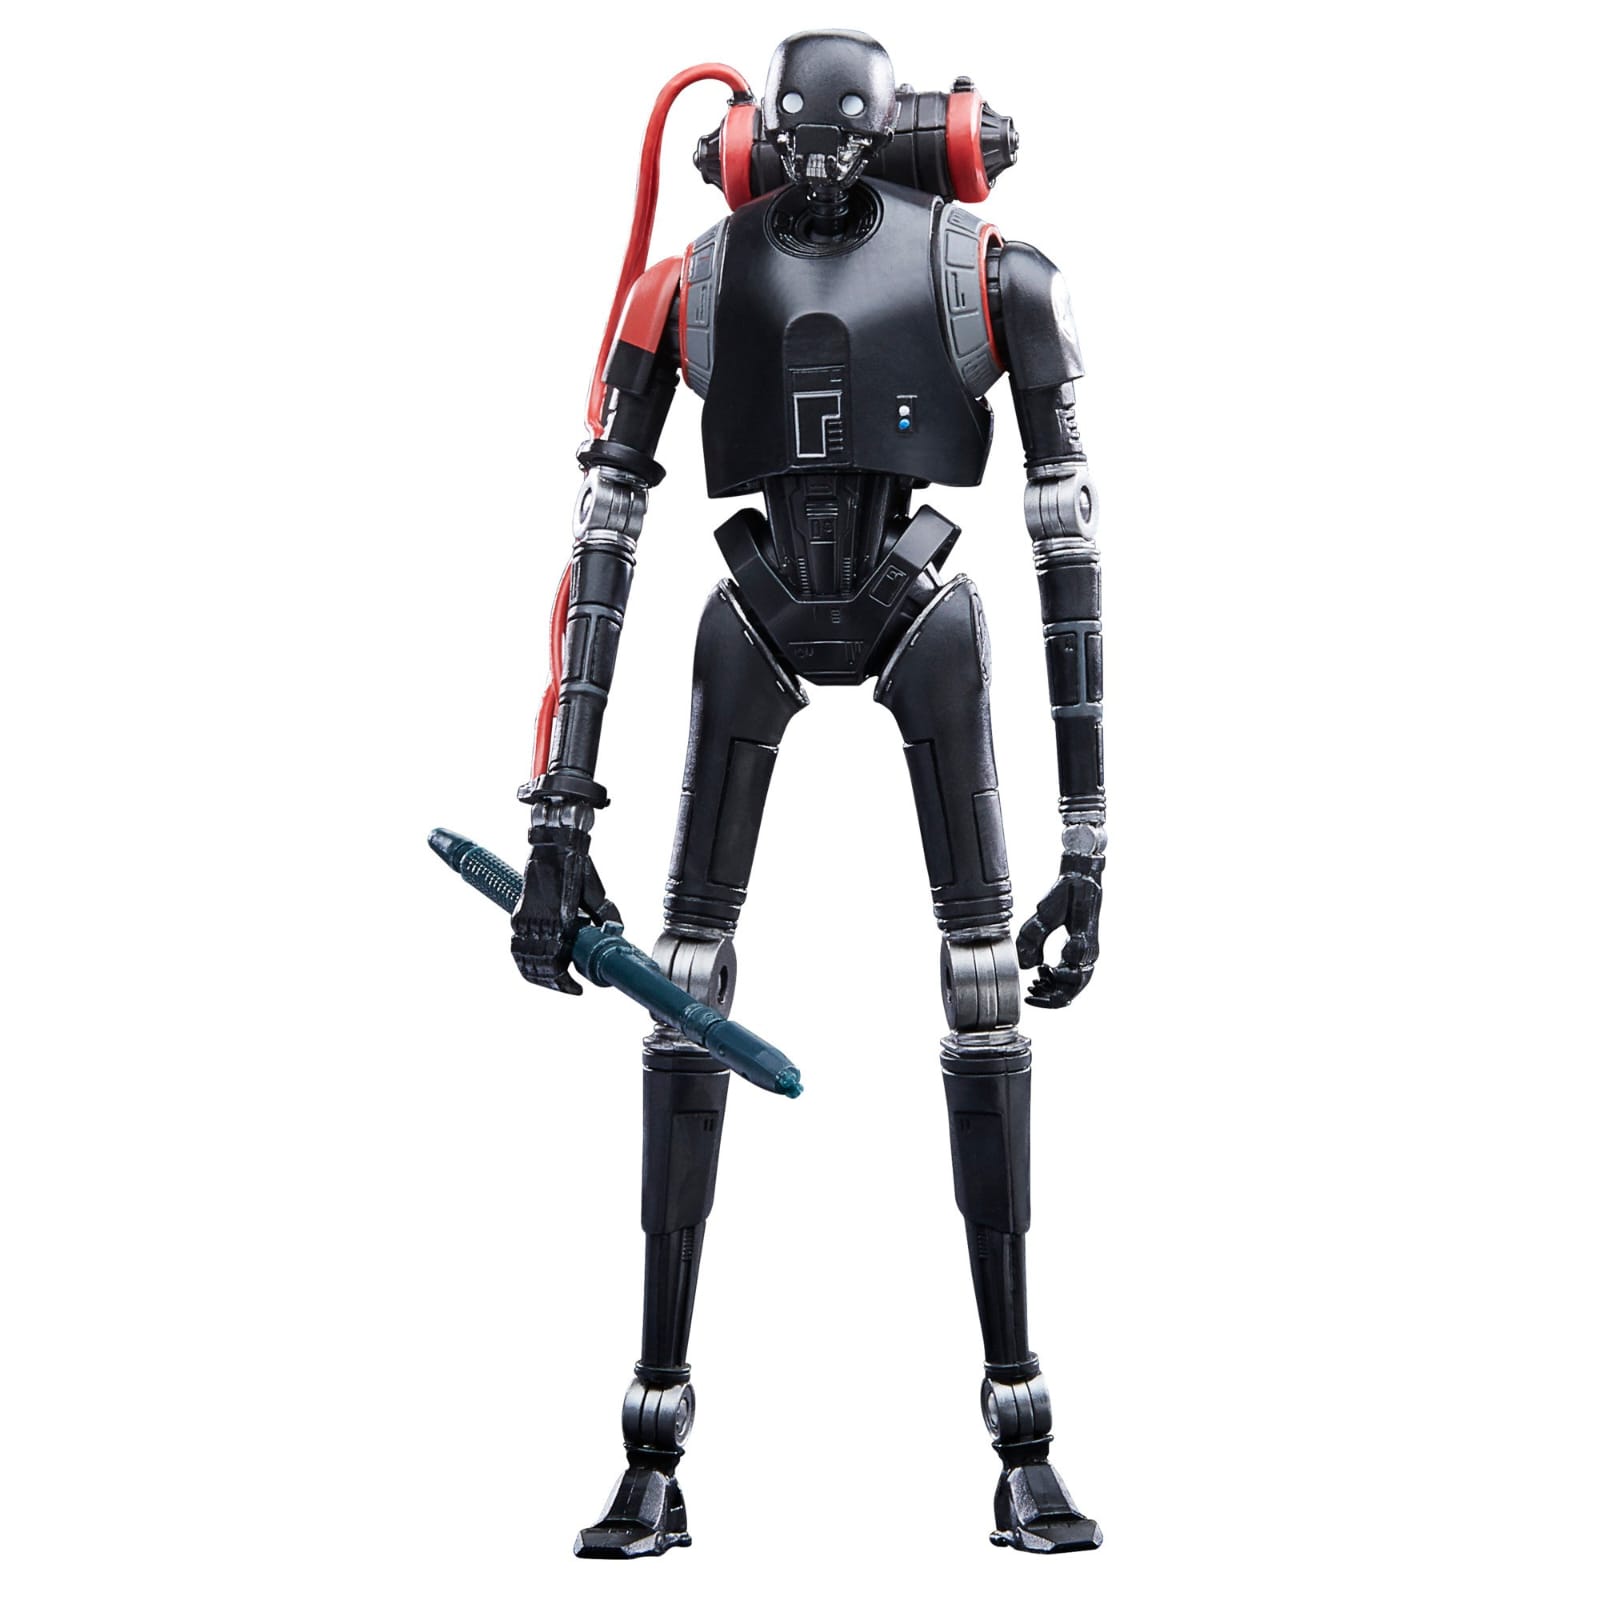 Star Wars The Black Series Gaming Greats KX Security Droid  